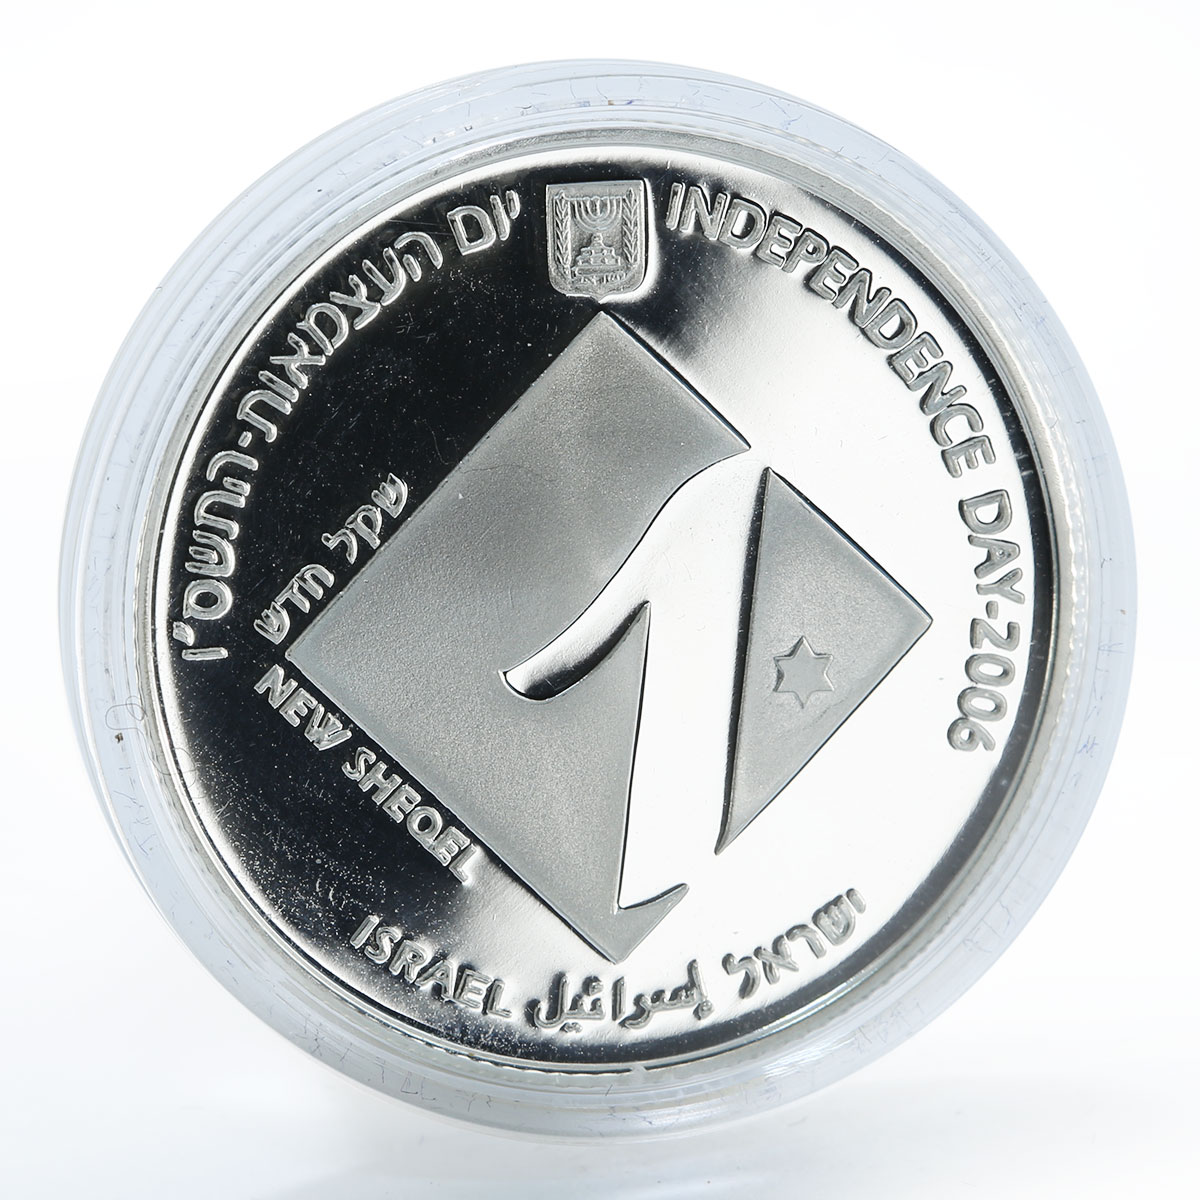 Israel Shekel 1 Independence Day Higher Education in Israel silver proof 2006